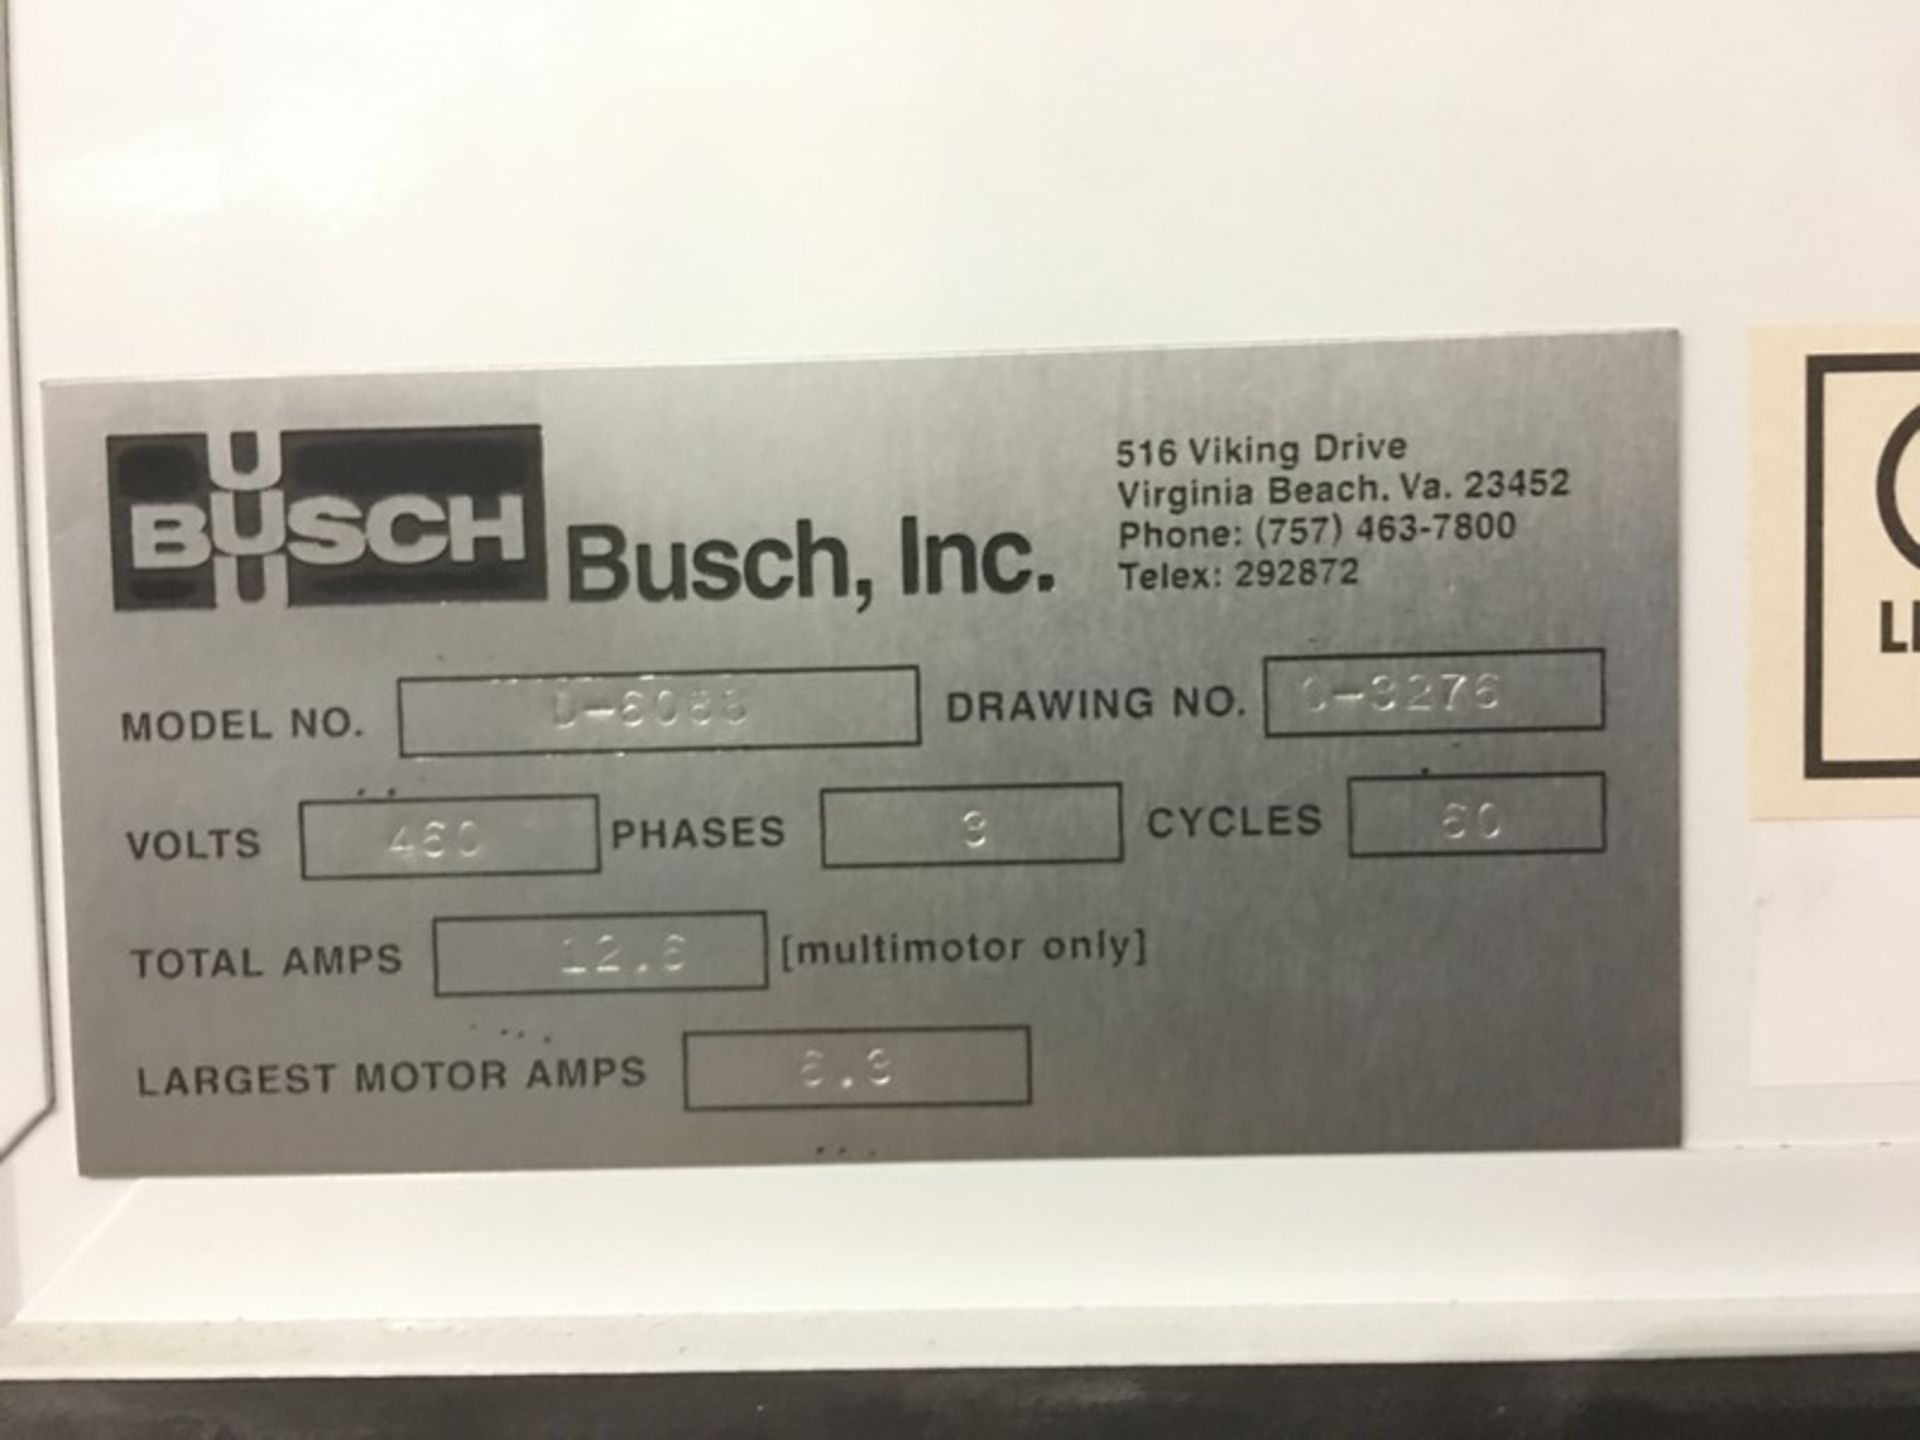 Busch 5 hp Vacuum System, Model D-6088, Drawing C-3276, with Toshiba 5 hp High Efficiency Motor, - Image 10 of 10